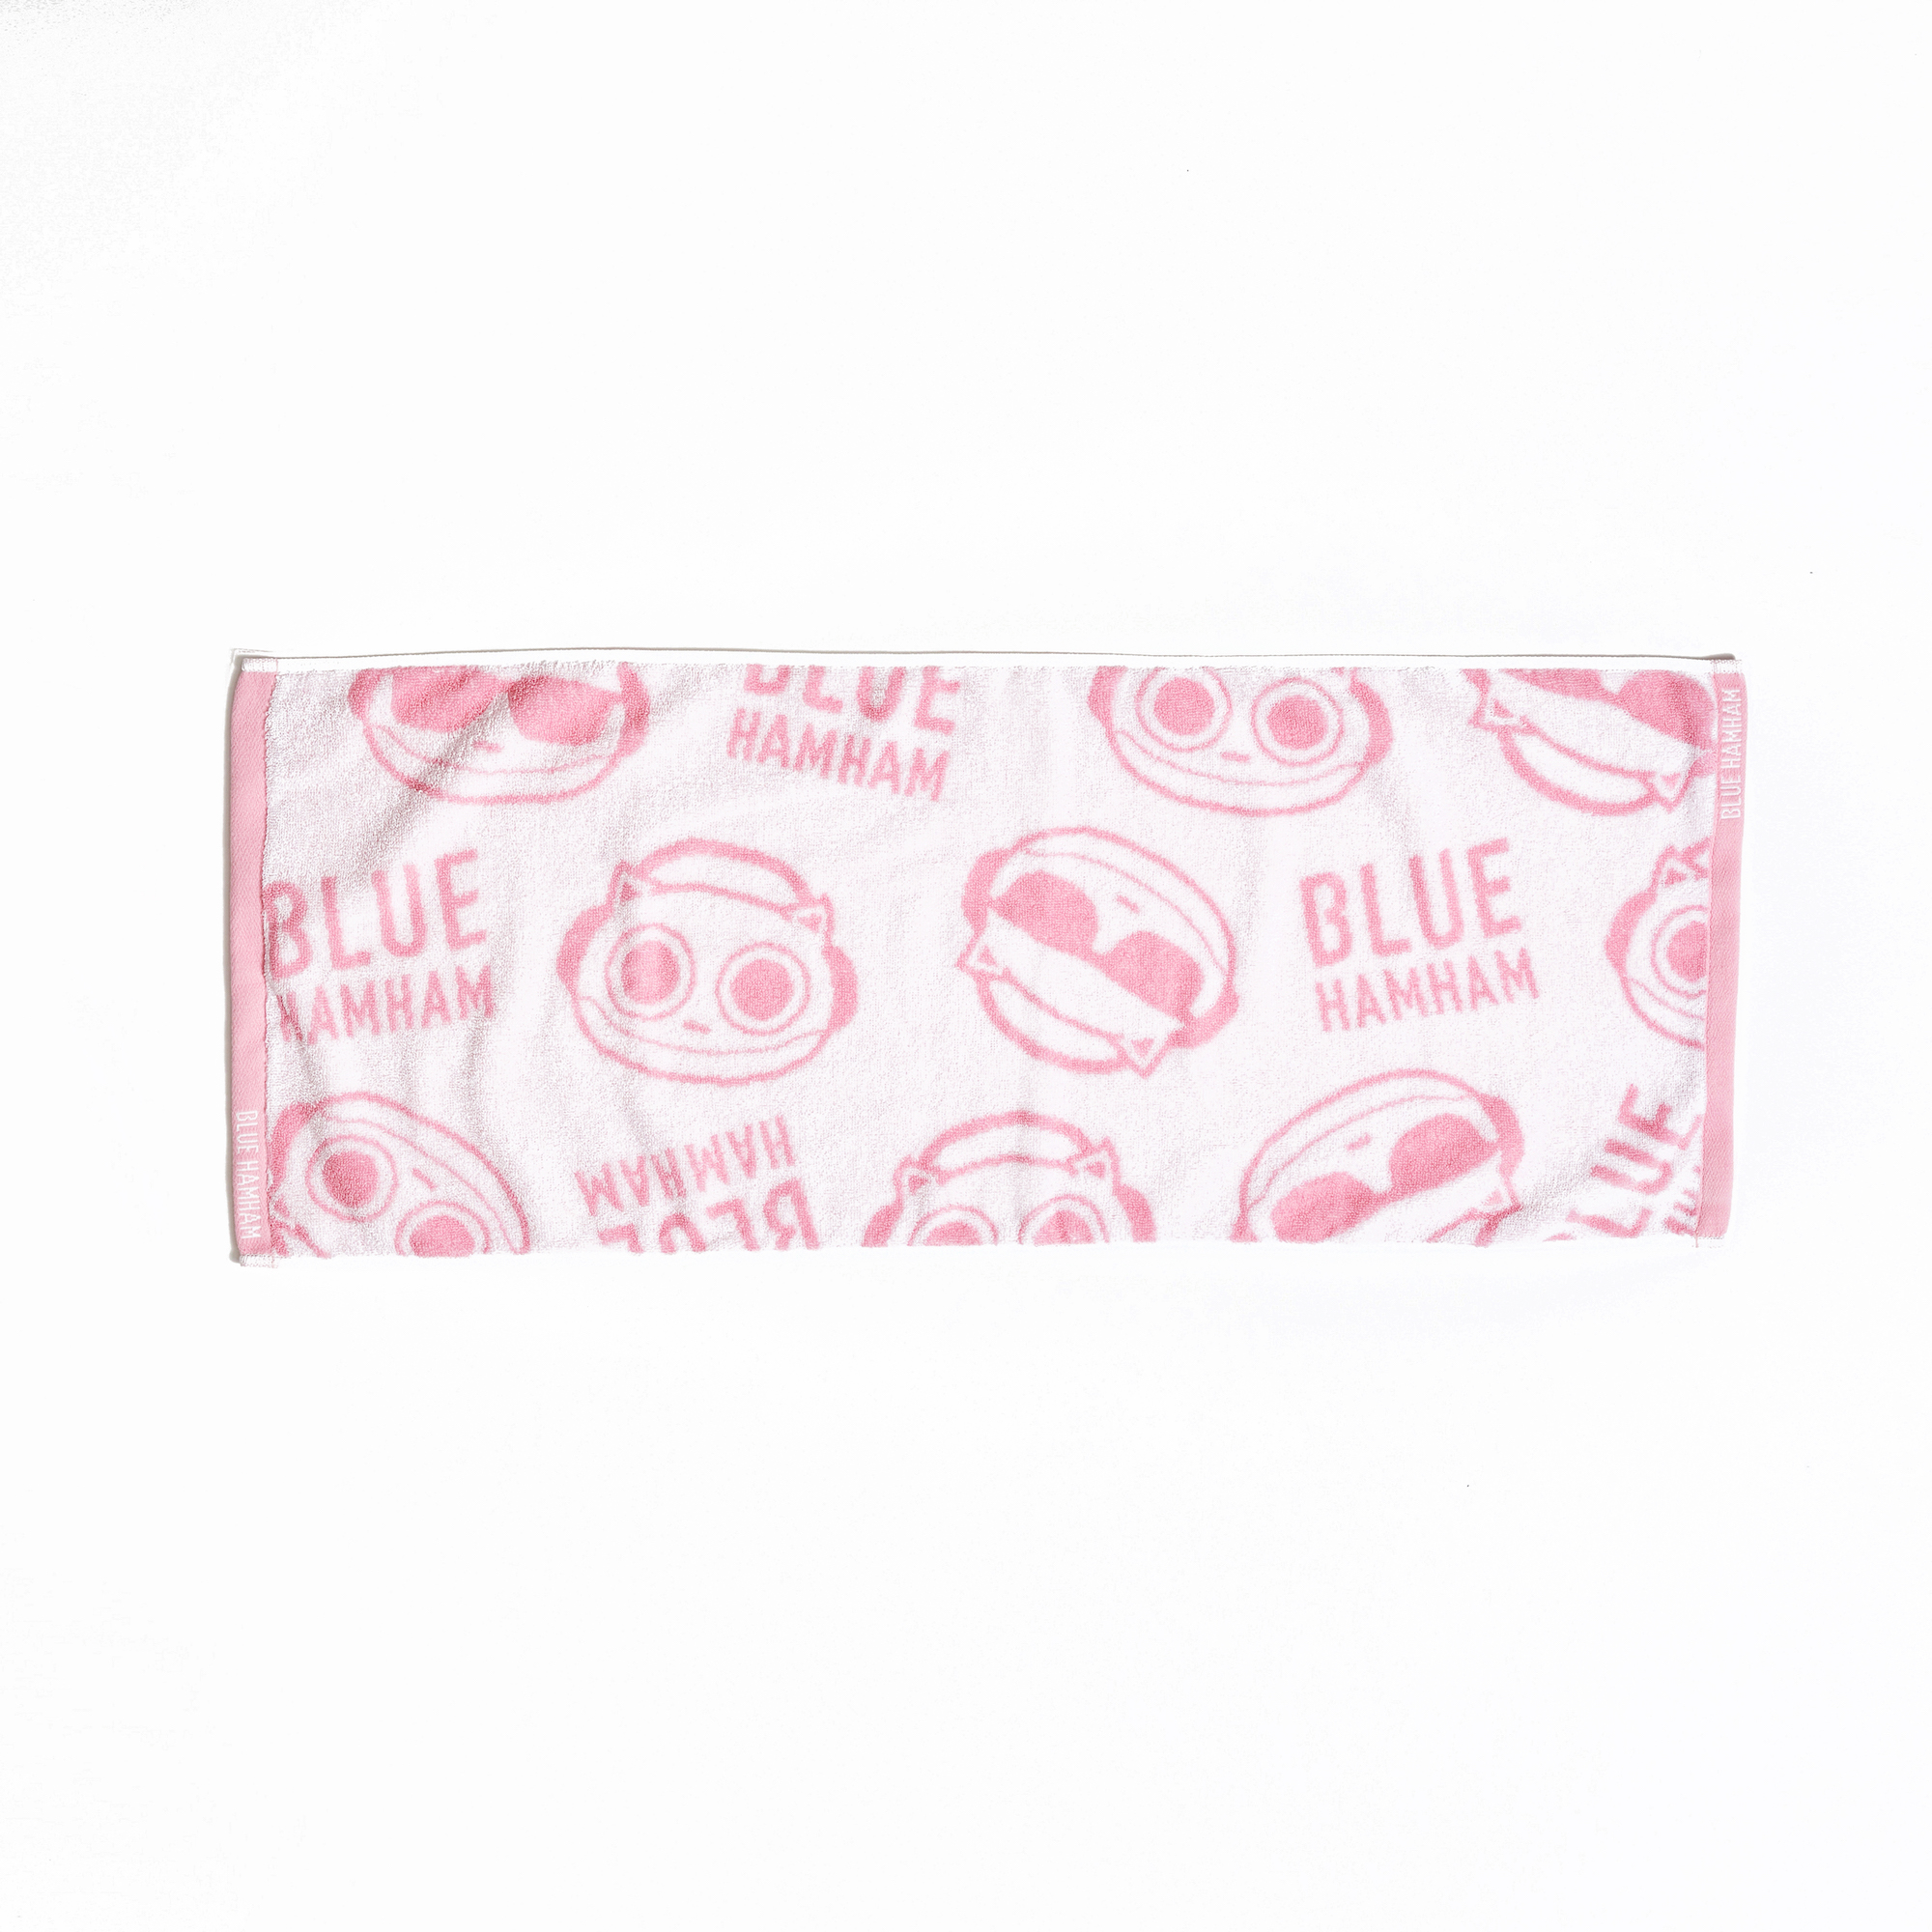 BLUE HAMHAM POP UP STORE -PINK COLLECTION- 8